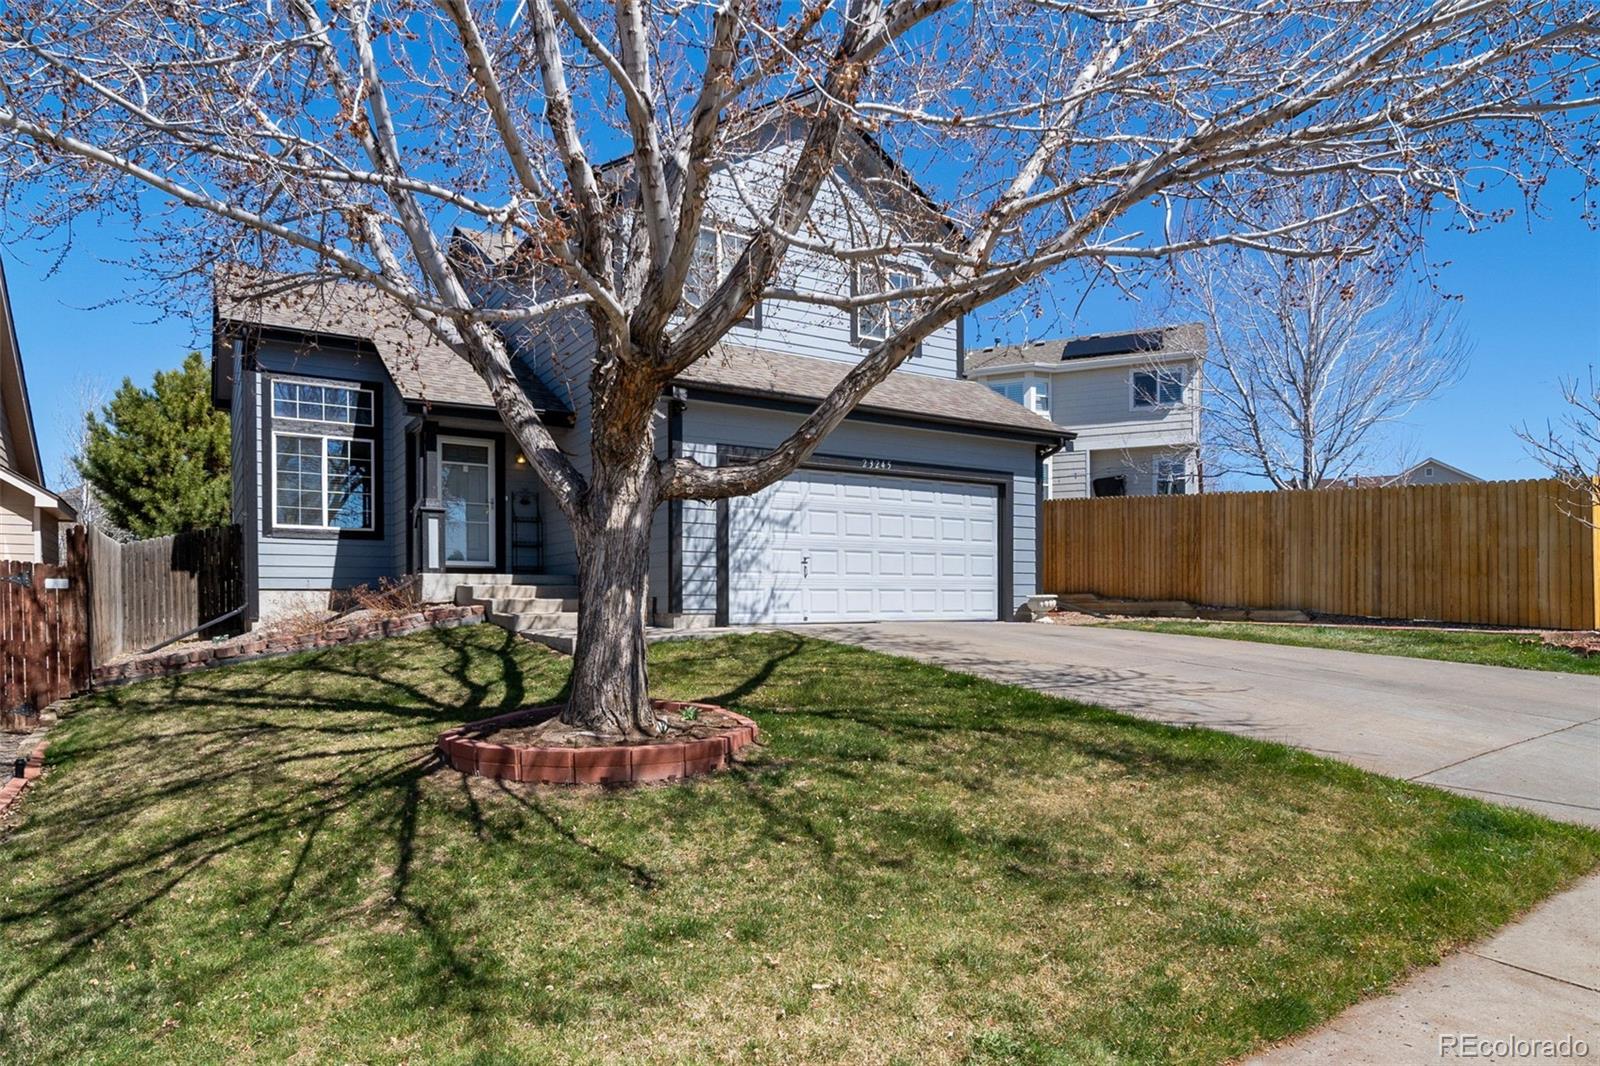 23245 e lake place, aurora sold home. Closed on 2024-05-10 for $535,000.